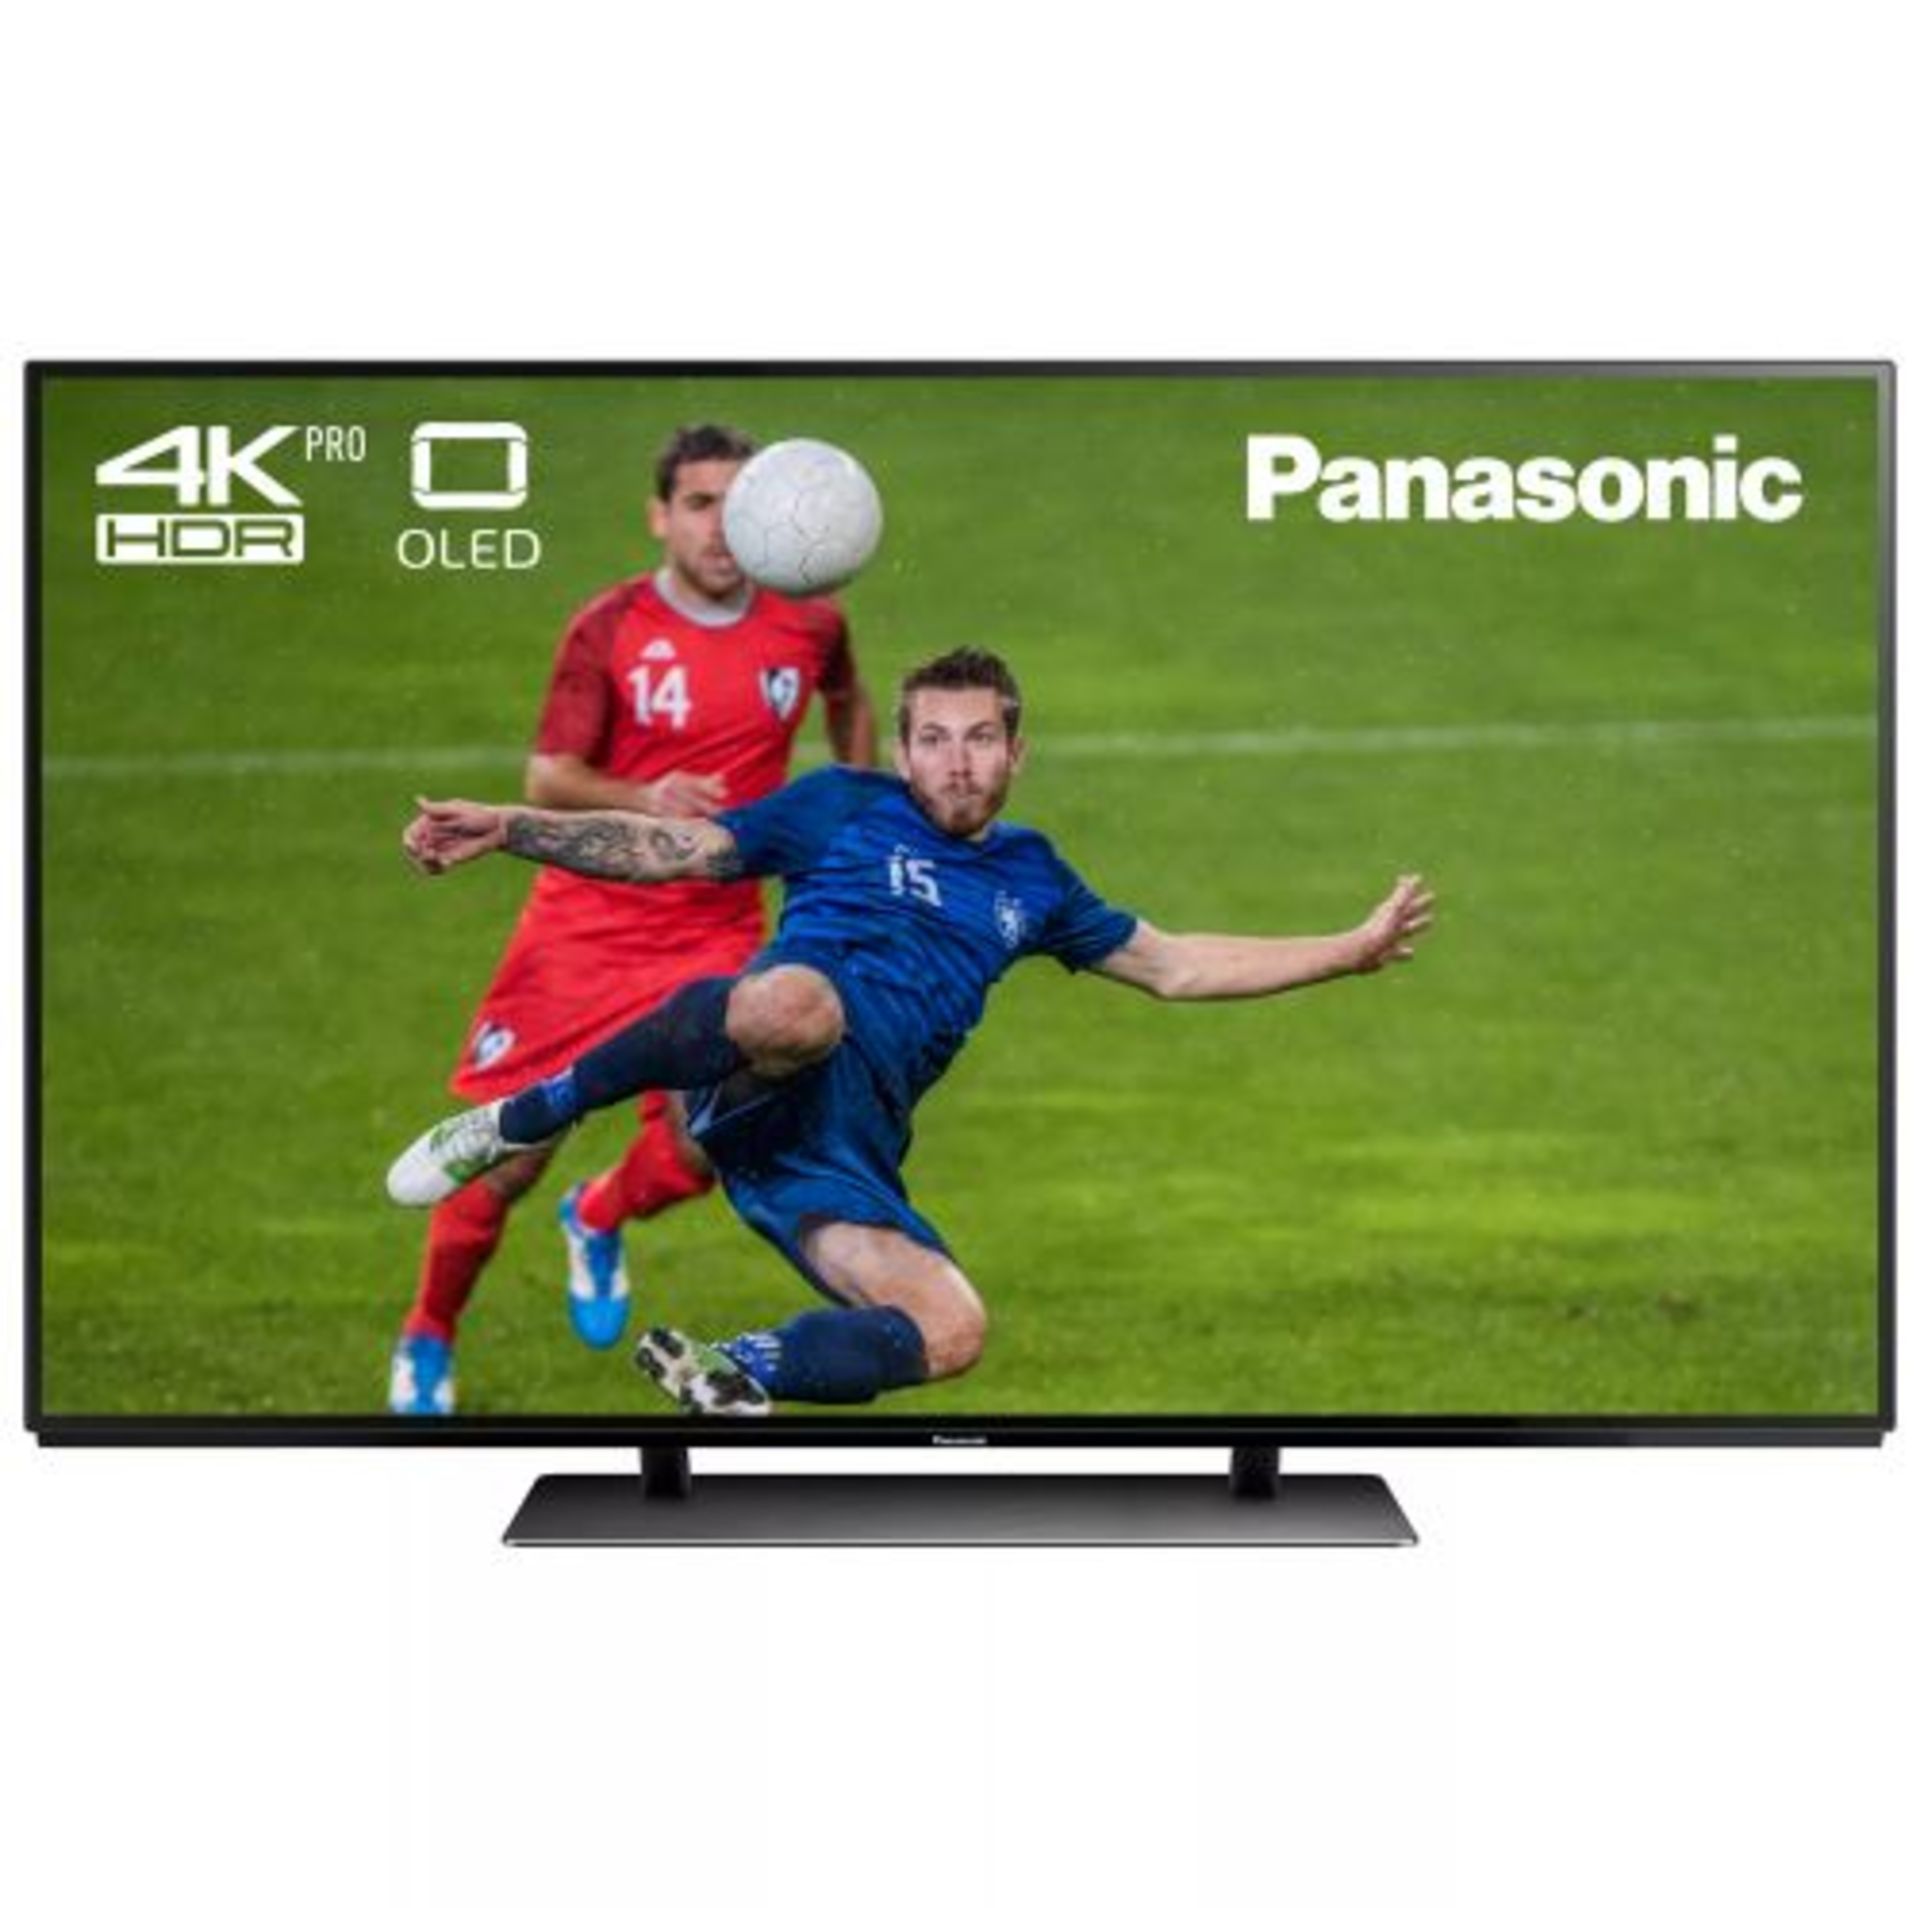 1 PANASONIC TX55EZ952B 55" OLED 4K ULTRA HD PREMIUM SMART TV FREEVIEW PLAY FREESAT HD WITH STAND AND